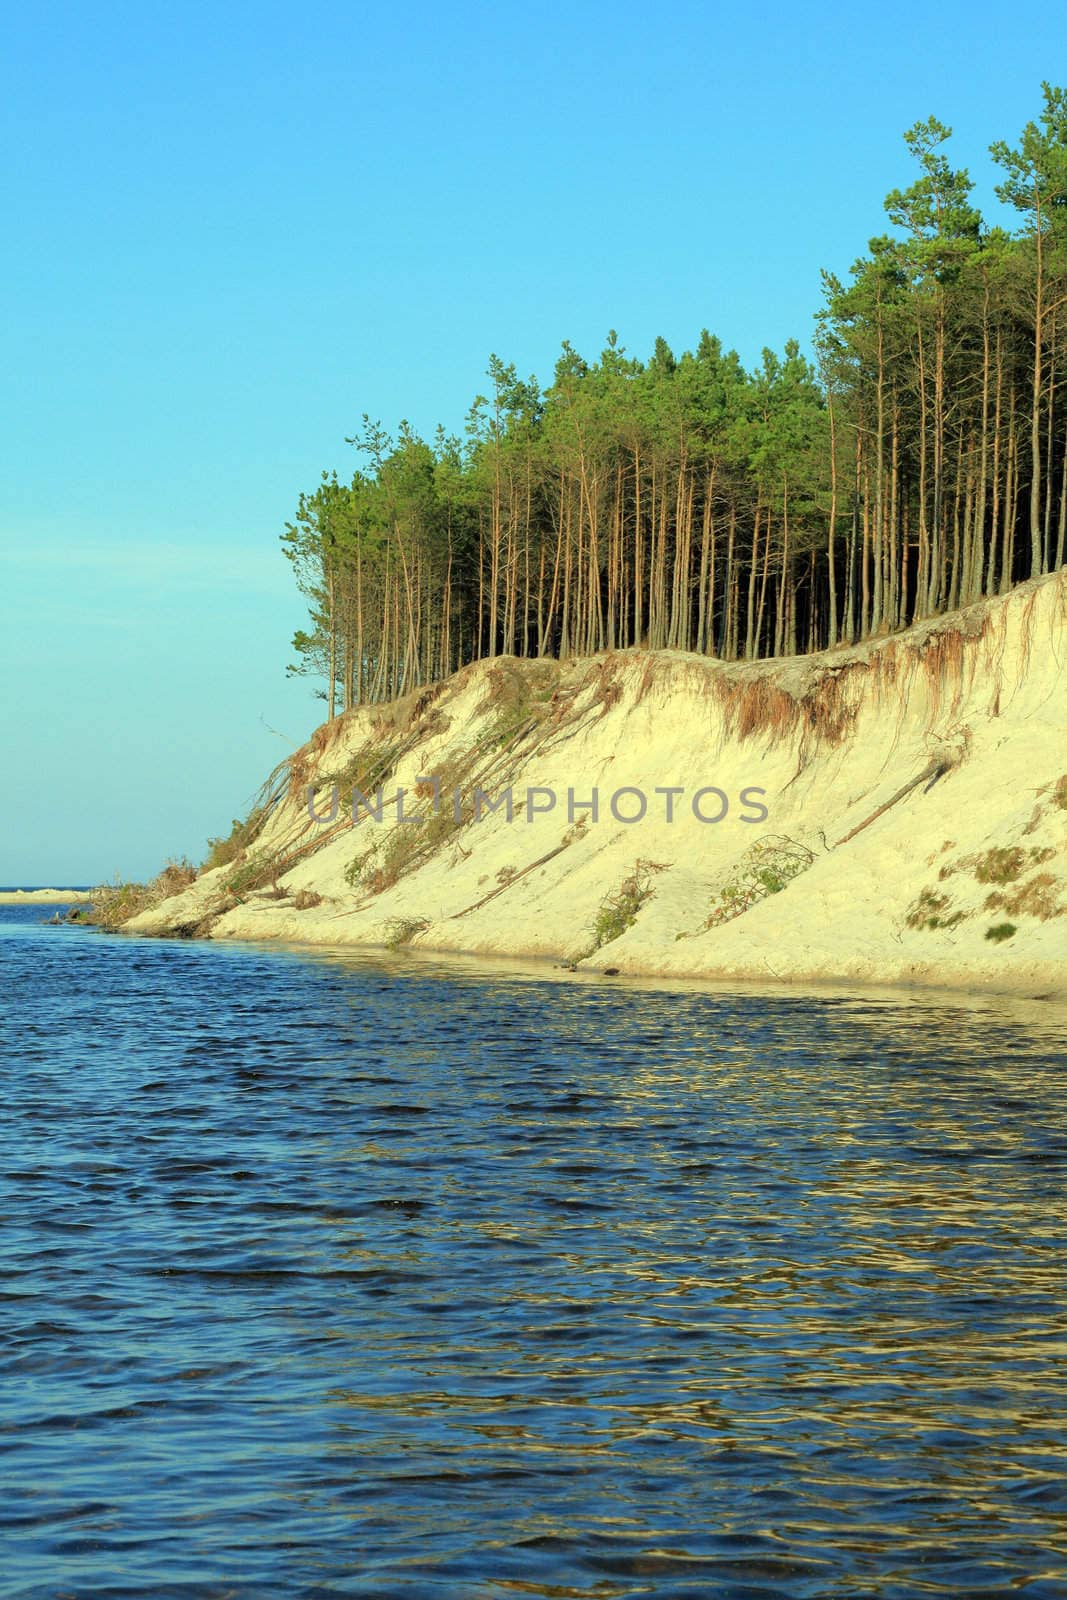 River and a cliff on the seashore